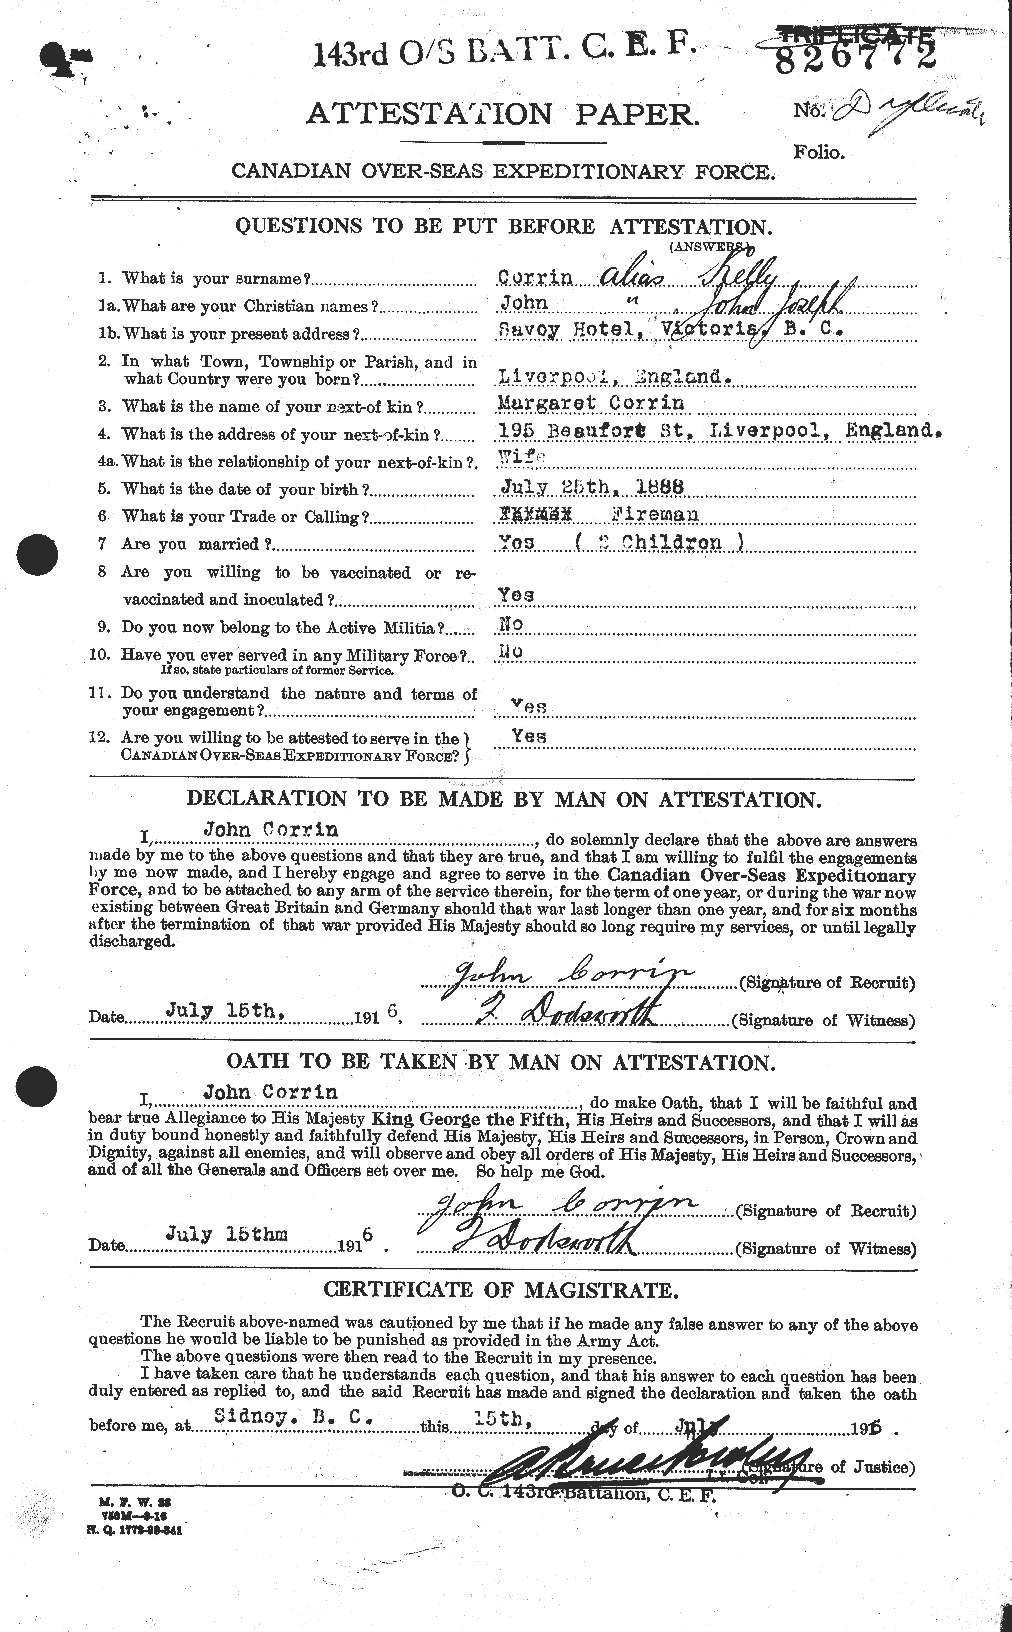 Personnel Records of the First World War - CEF 433562a